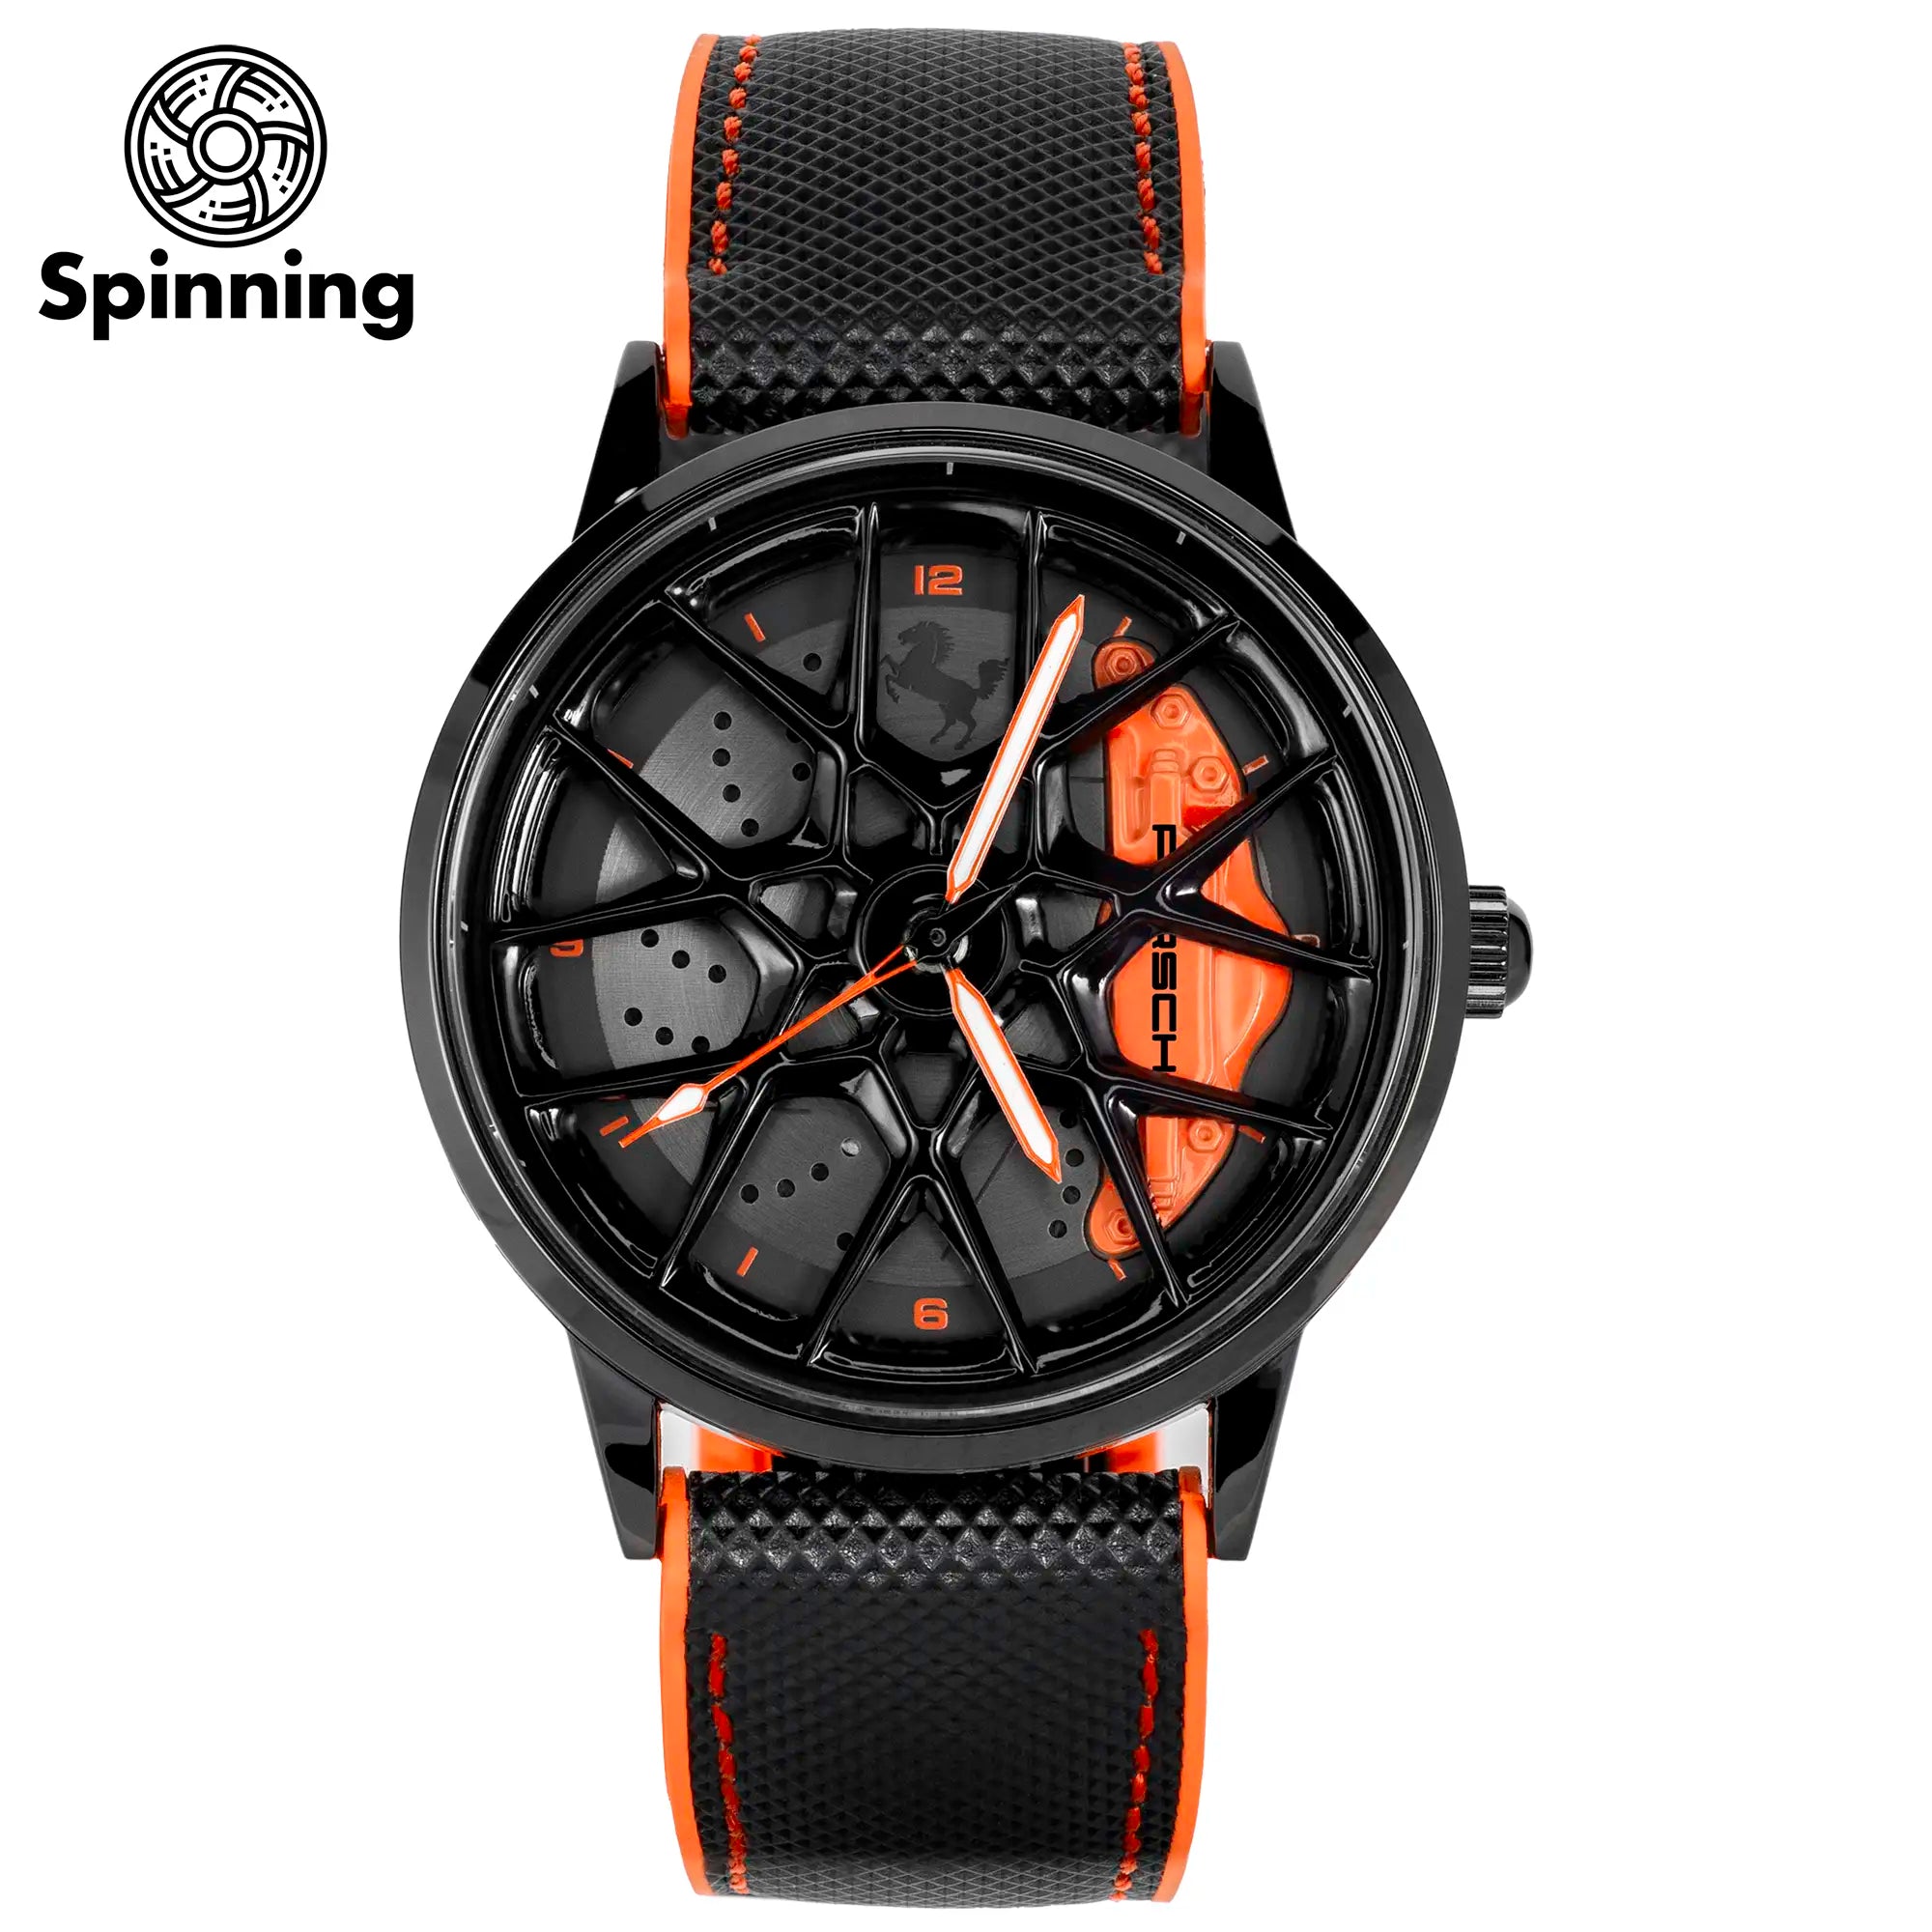 Car Wheel Watch, Stainless Steel Mens Wristwatch with Spinning Car Rim Hub  Design, Japanese Quartz Movement, Water Resistant, Scratch Resistant Gifts  for Car Enthusiasts, Green : Amazon.in: Car & Motorbike